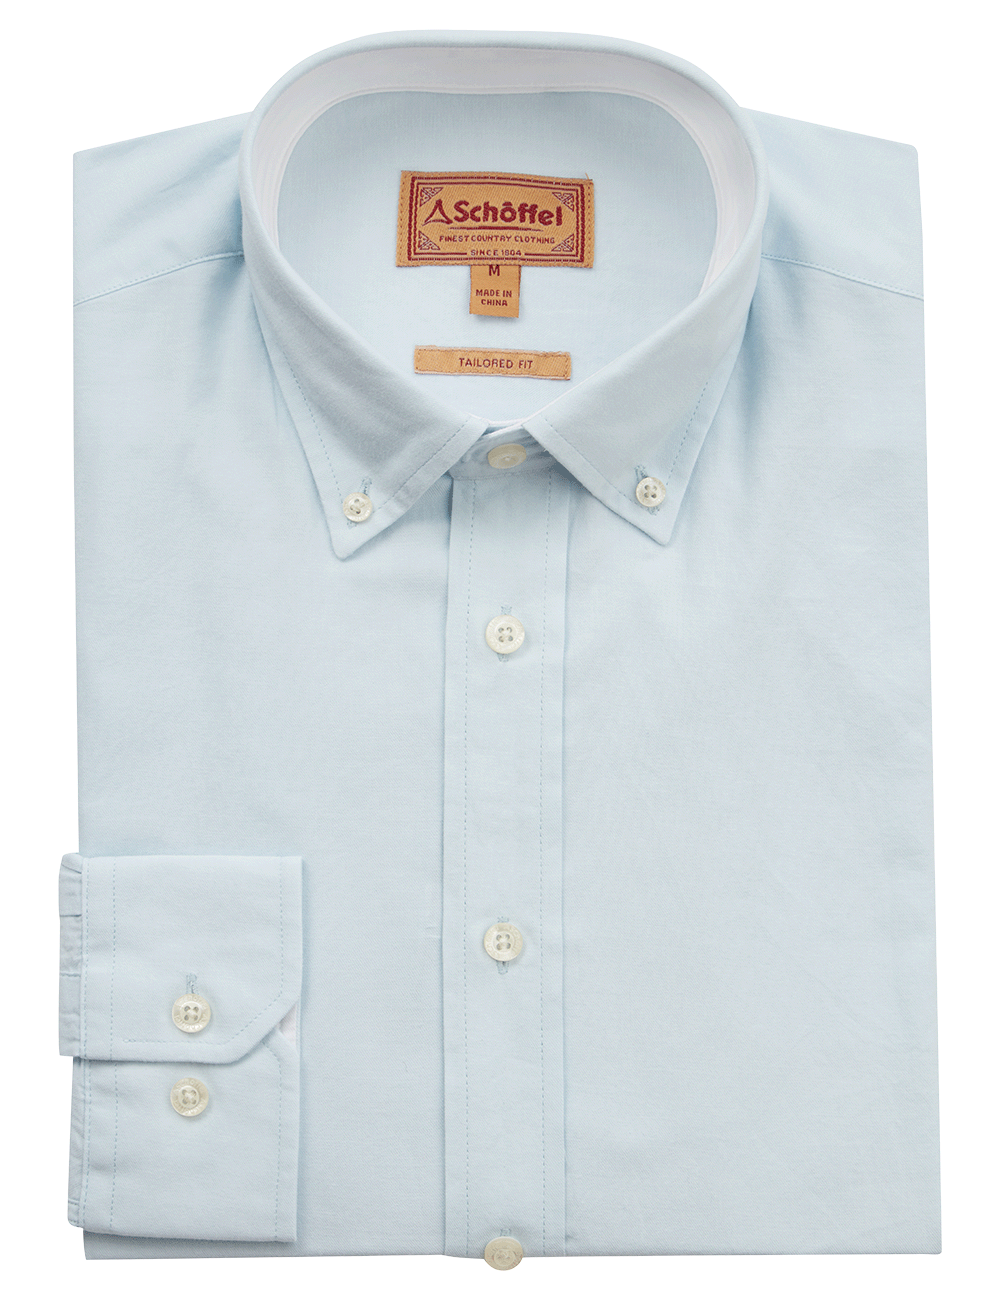 Schoffel Titchwell Tailored Shirt - Pale Blue